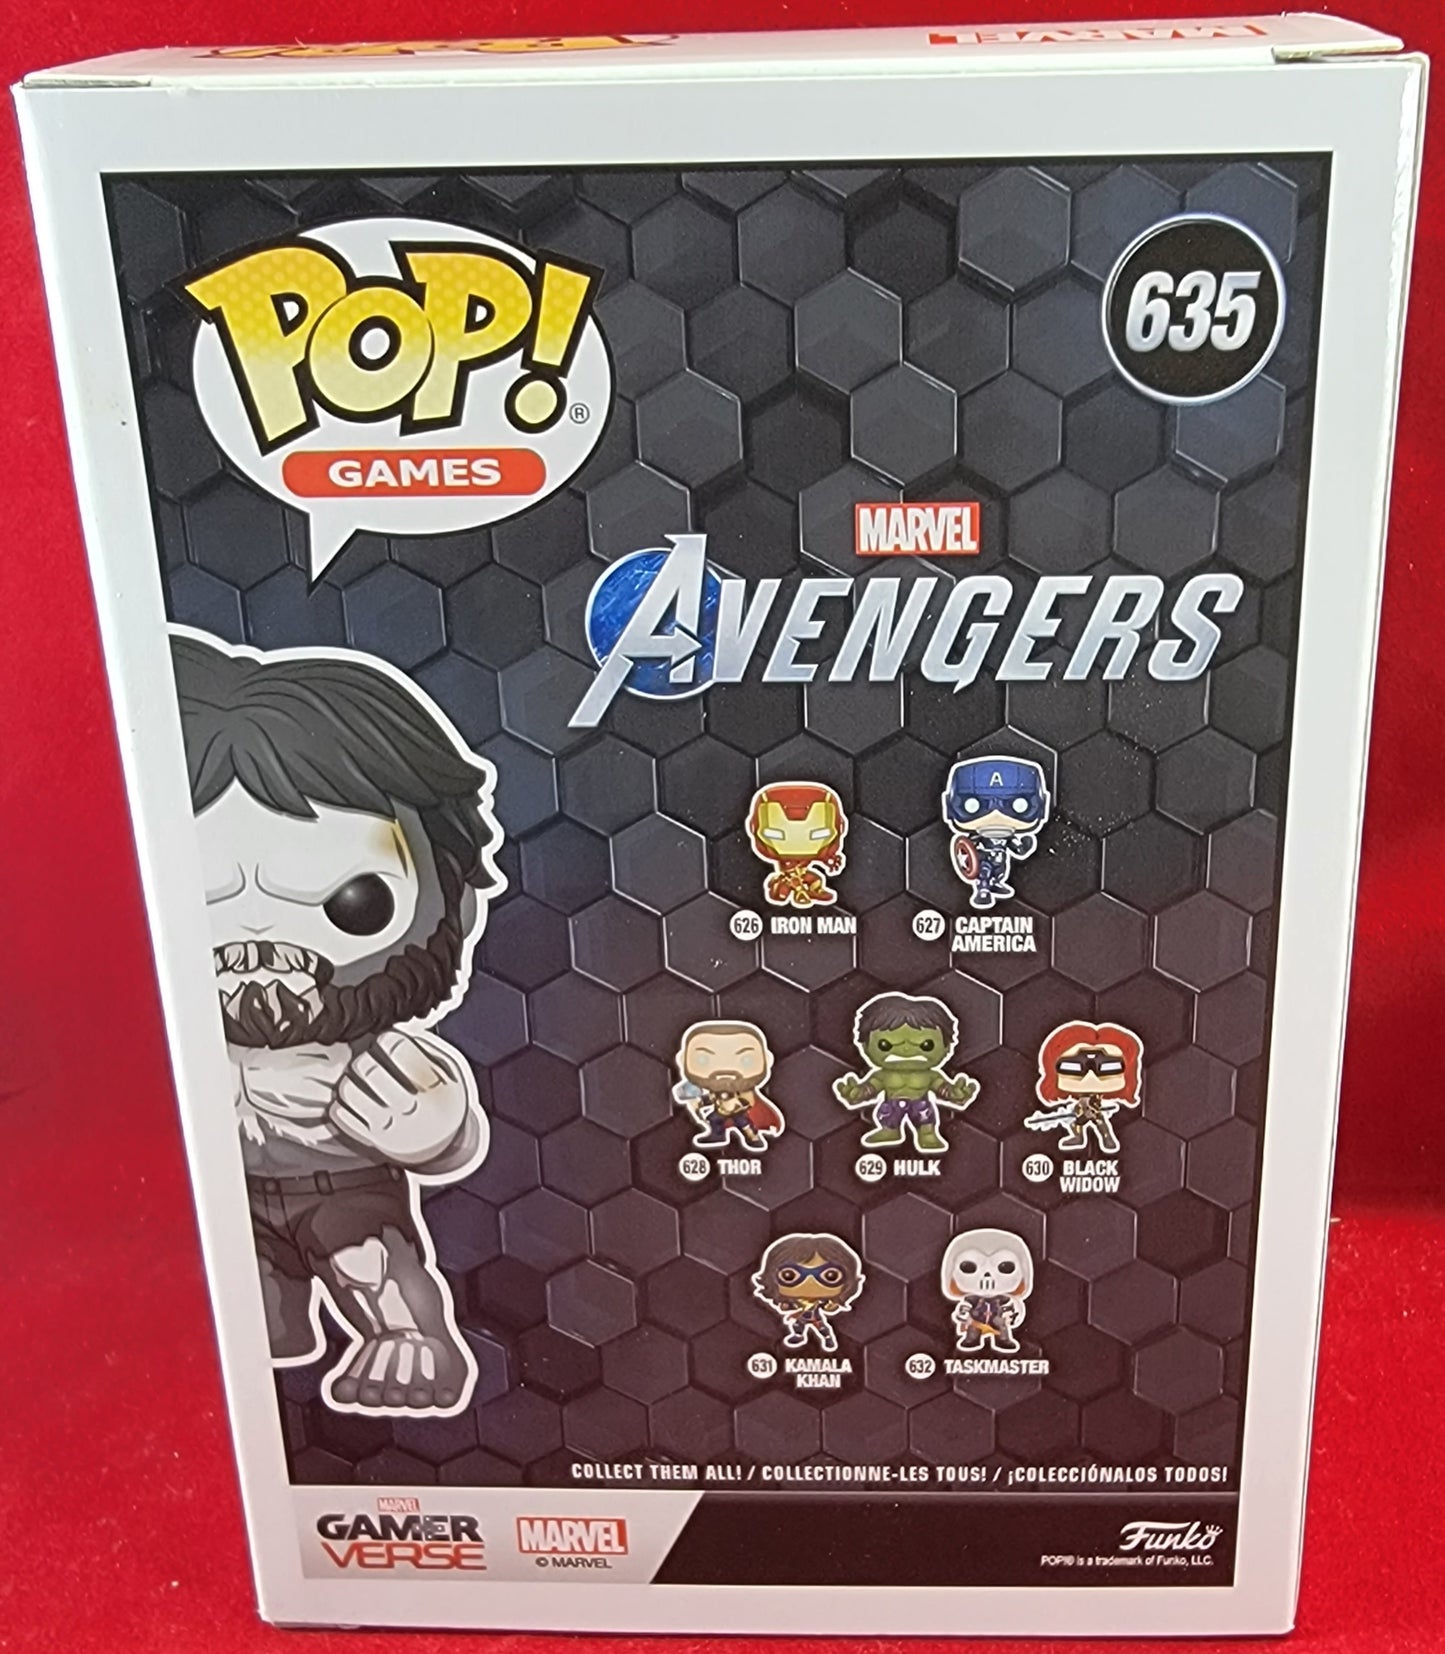 Hulk walmart exclusive funko # 635 (nib)
brand new gamerverse black and white hulk. pop has hulk with a beard painted like a skeleton. pop is near perfect and will be shipped in a compatible pop protector.